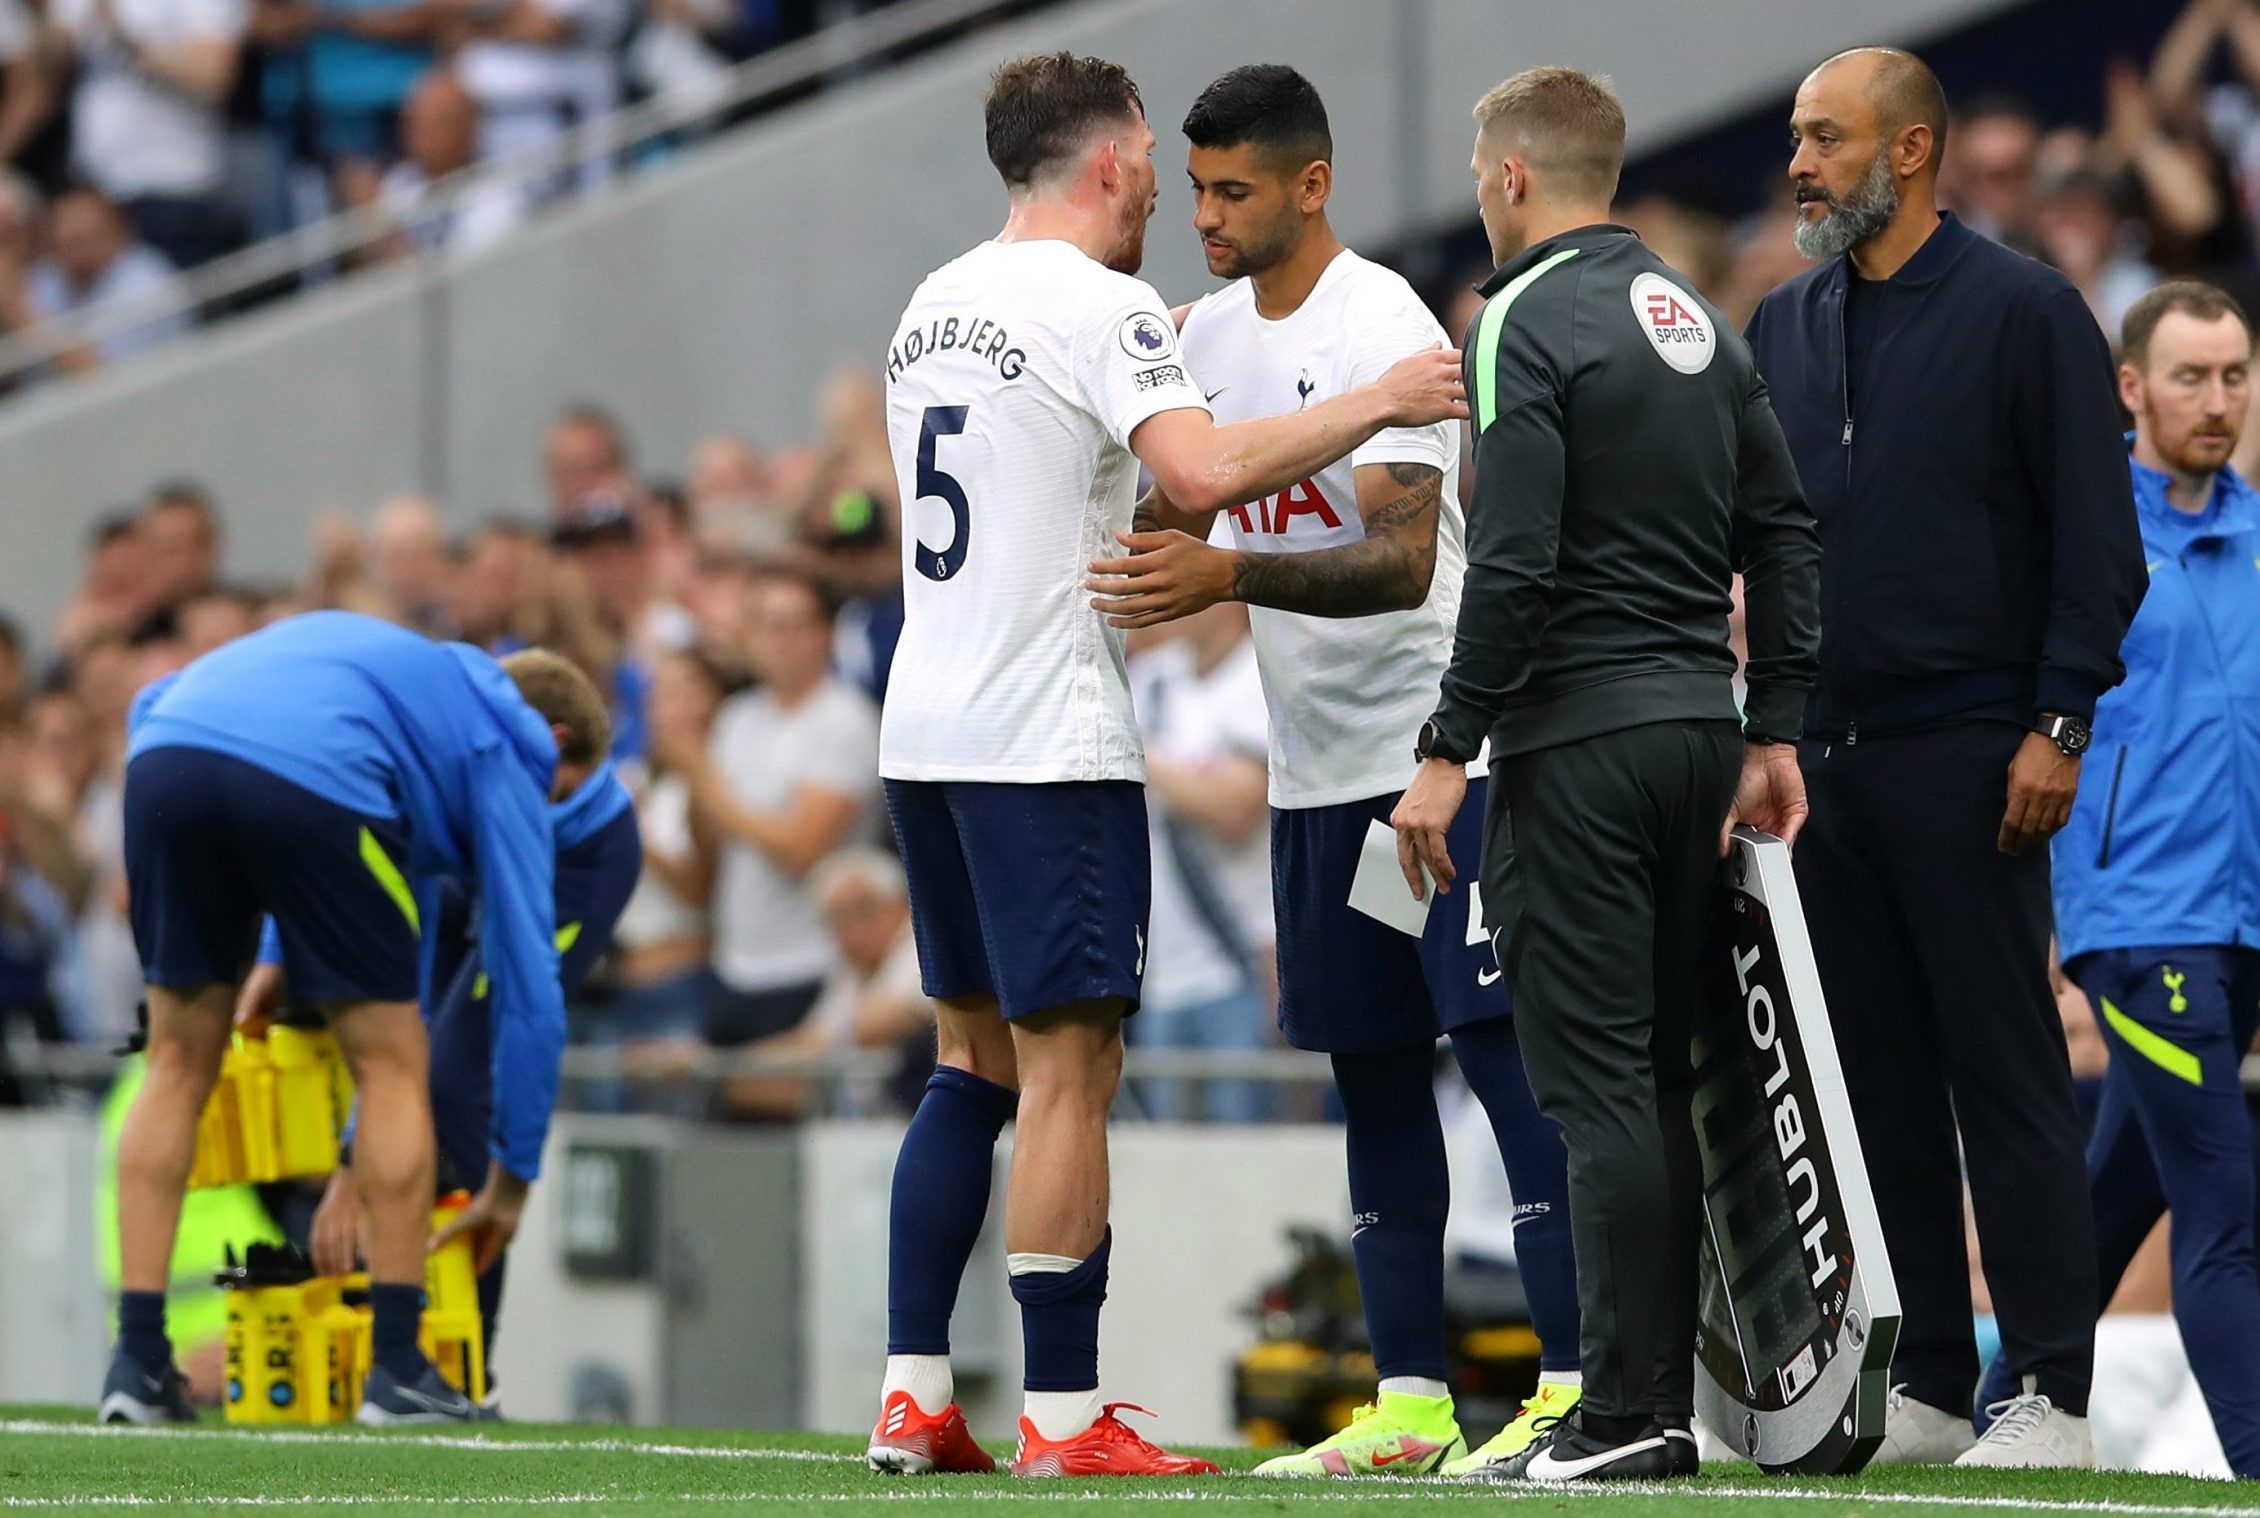 Tottenham Hotspur summer signing Cristian Romero comes on as a substitute to replace Pierre-Emile Hojbjerg against Man City in the Premier League